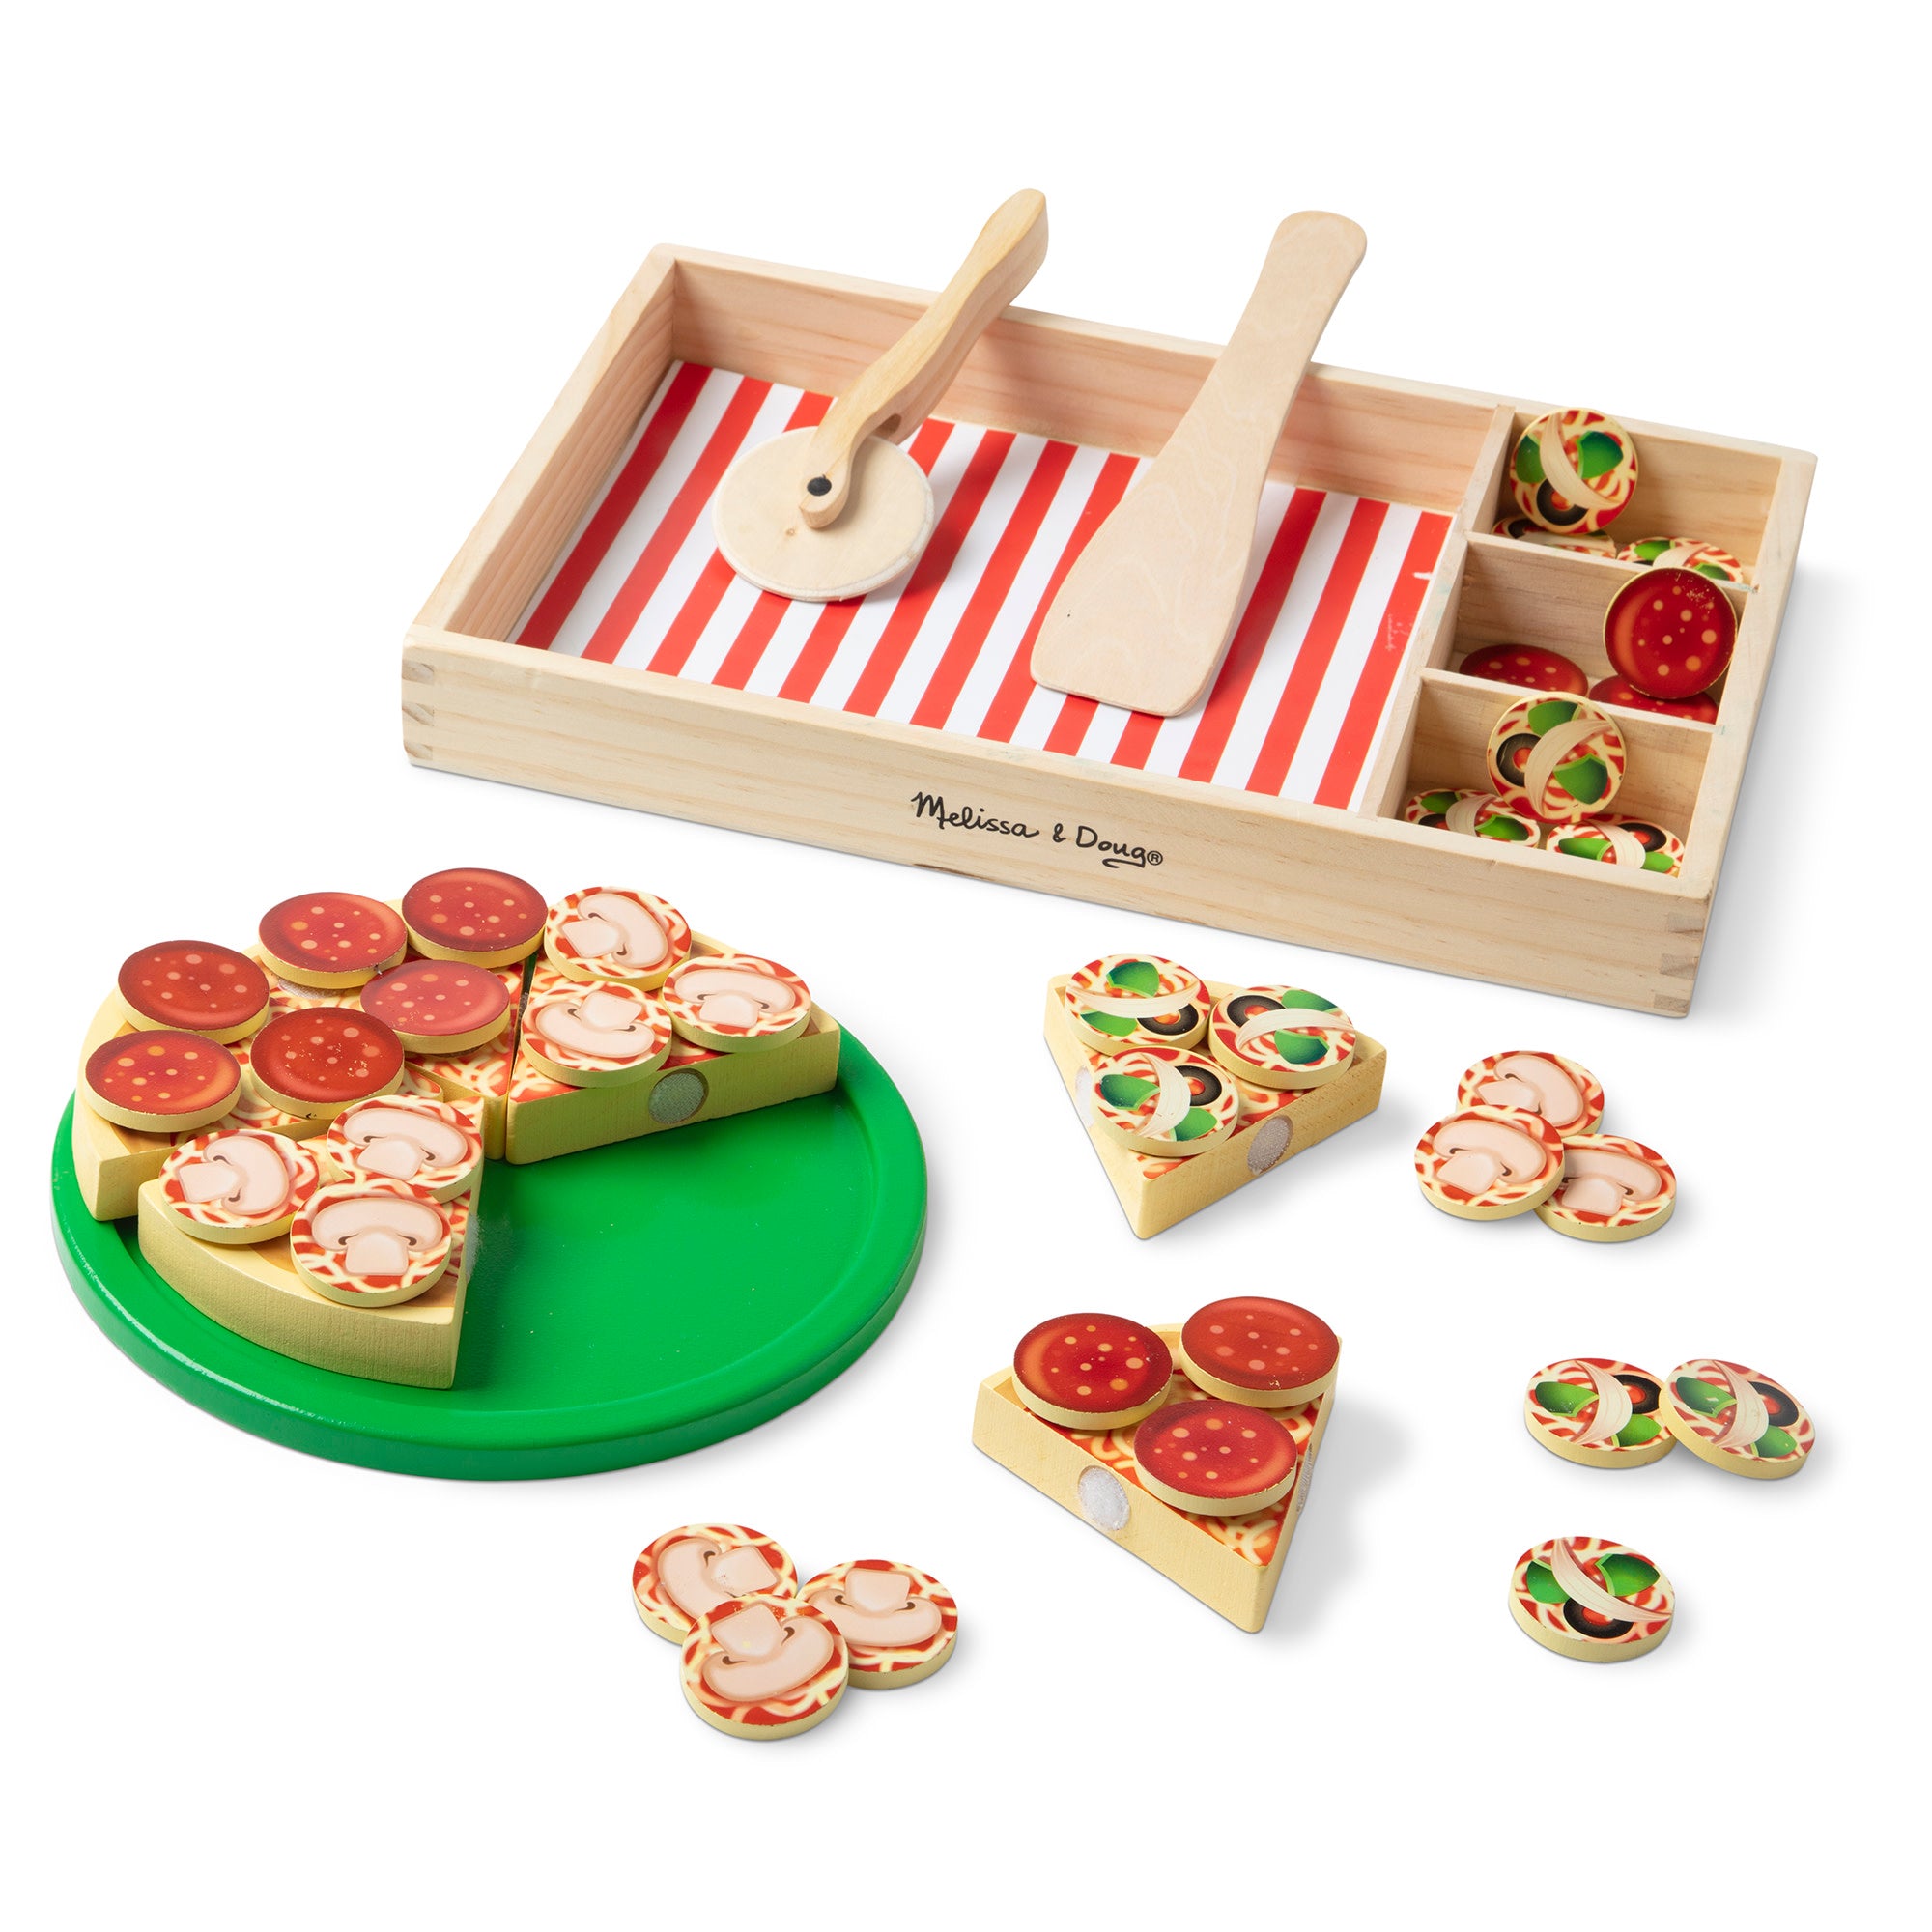 Pizza set toy pretending play toy funny toy